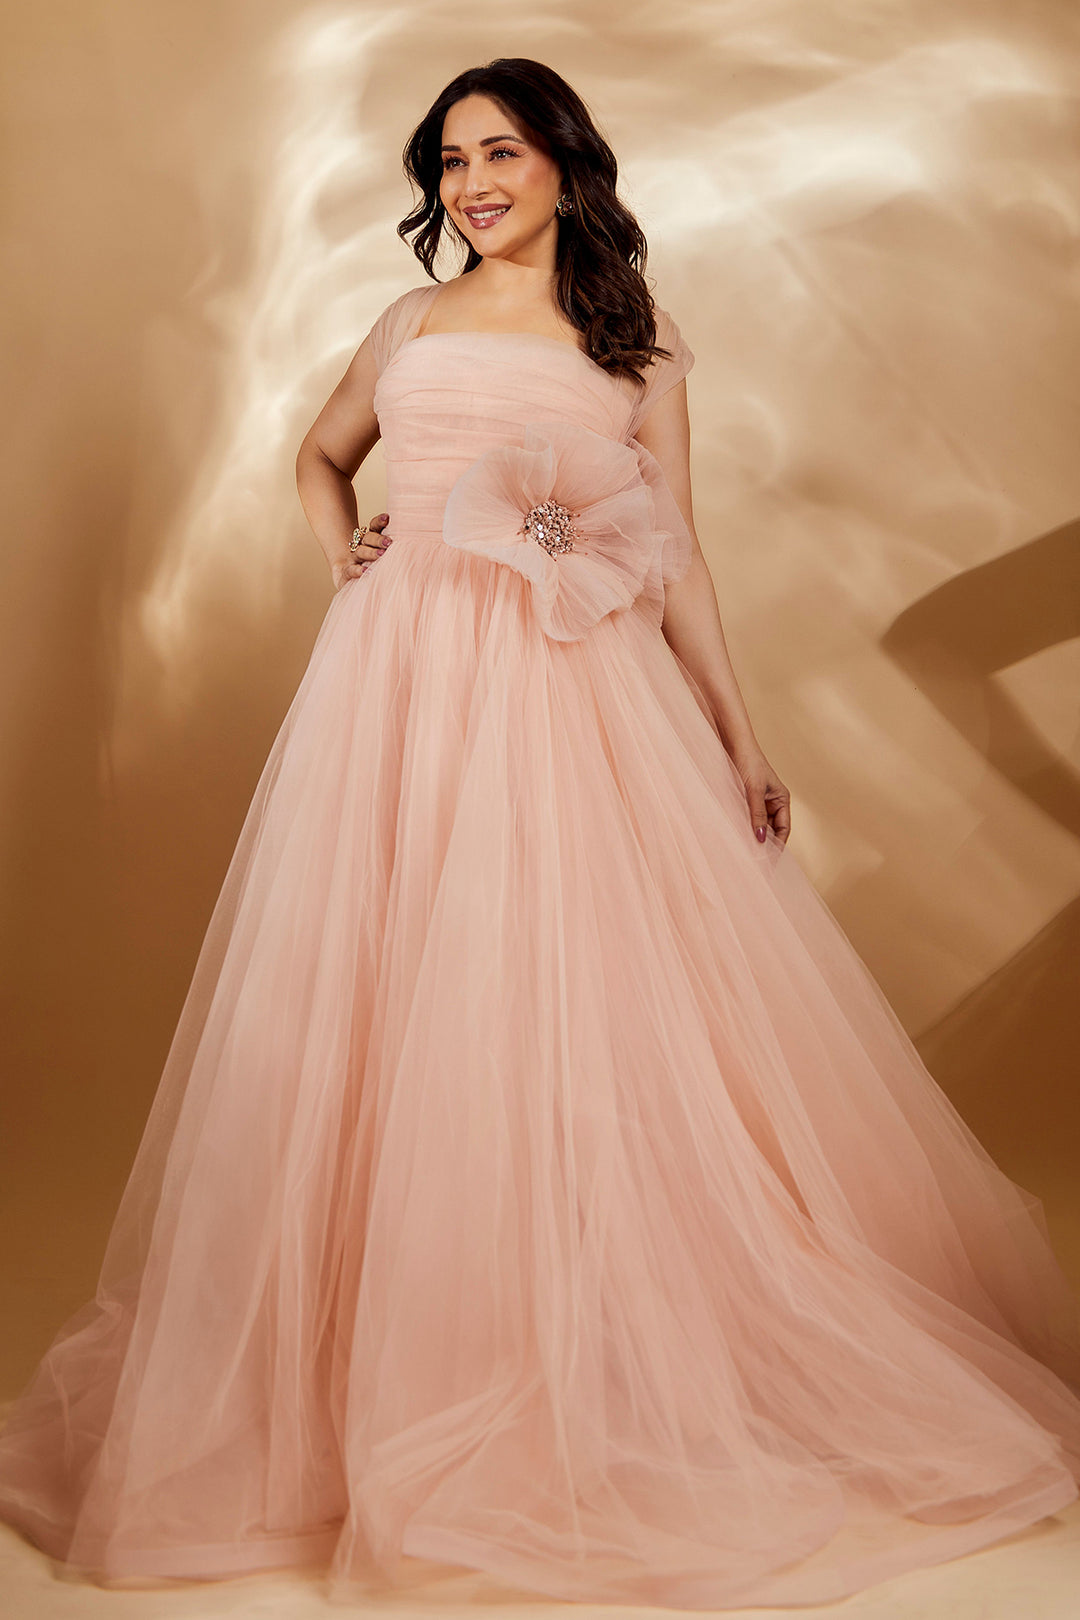 Madhuri Dixit in Corseted Tulle Gown and Sculpted Flower